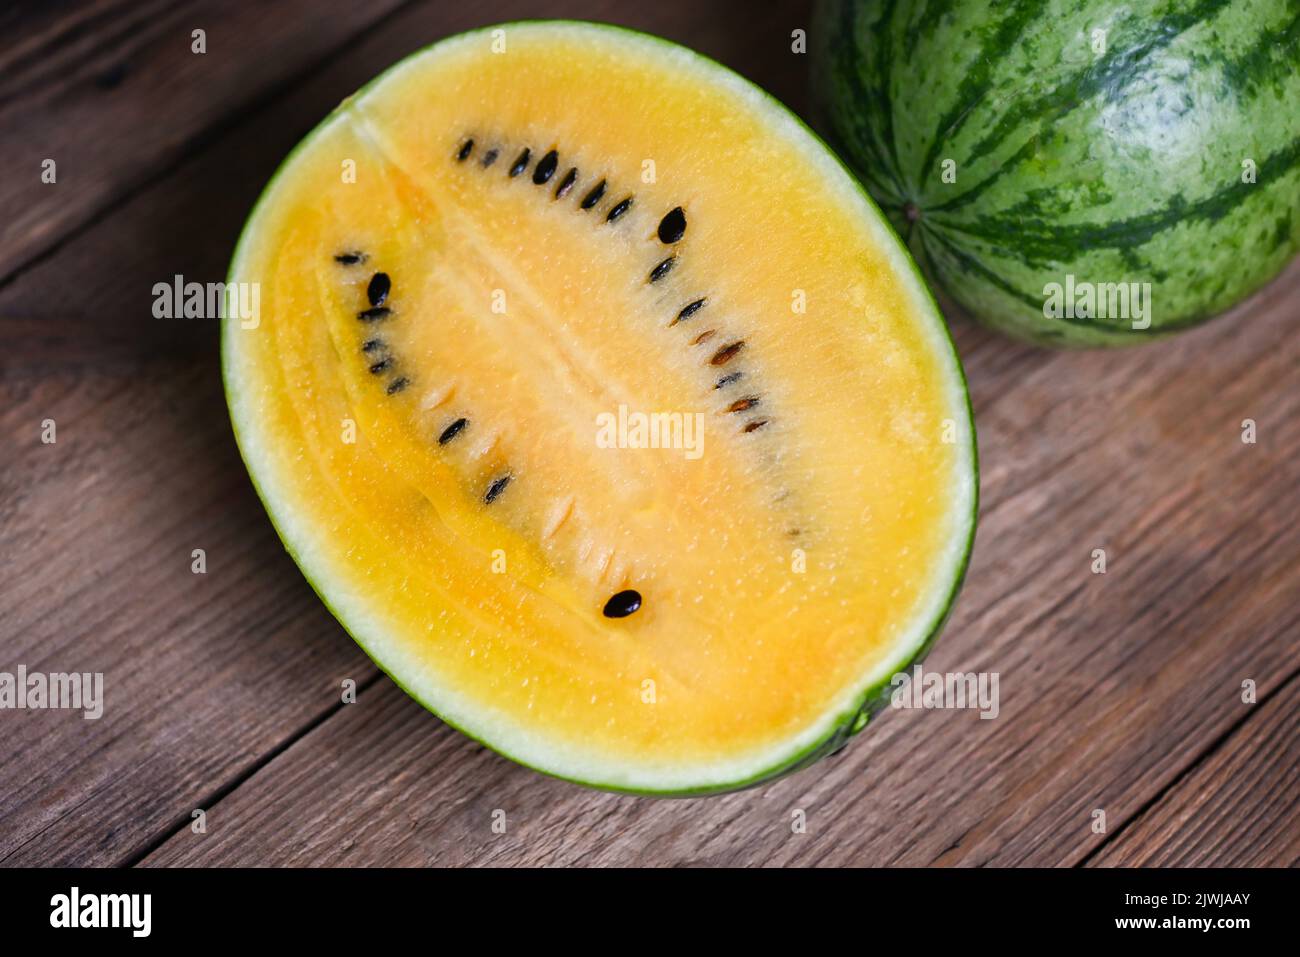 Yellow watermelon cut half on wooden, Closeup pile of sweet watermelon slices pieces fresh watermelon tropical summer fruit Stock Photo